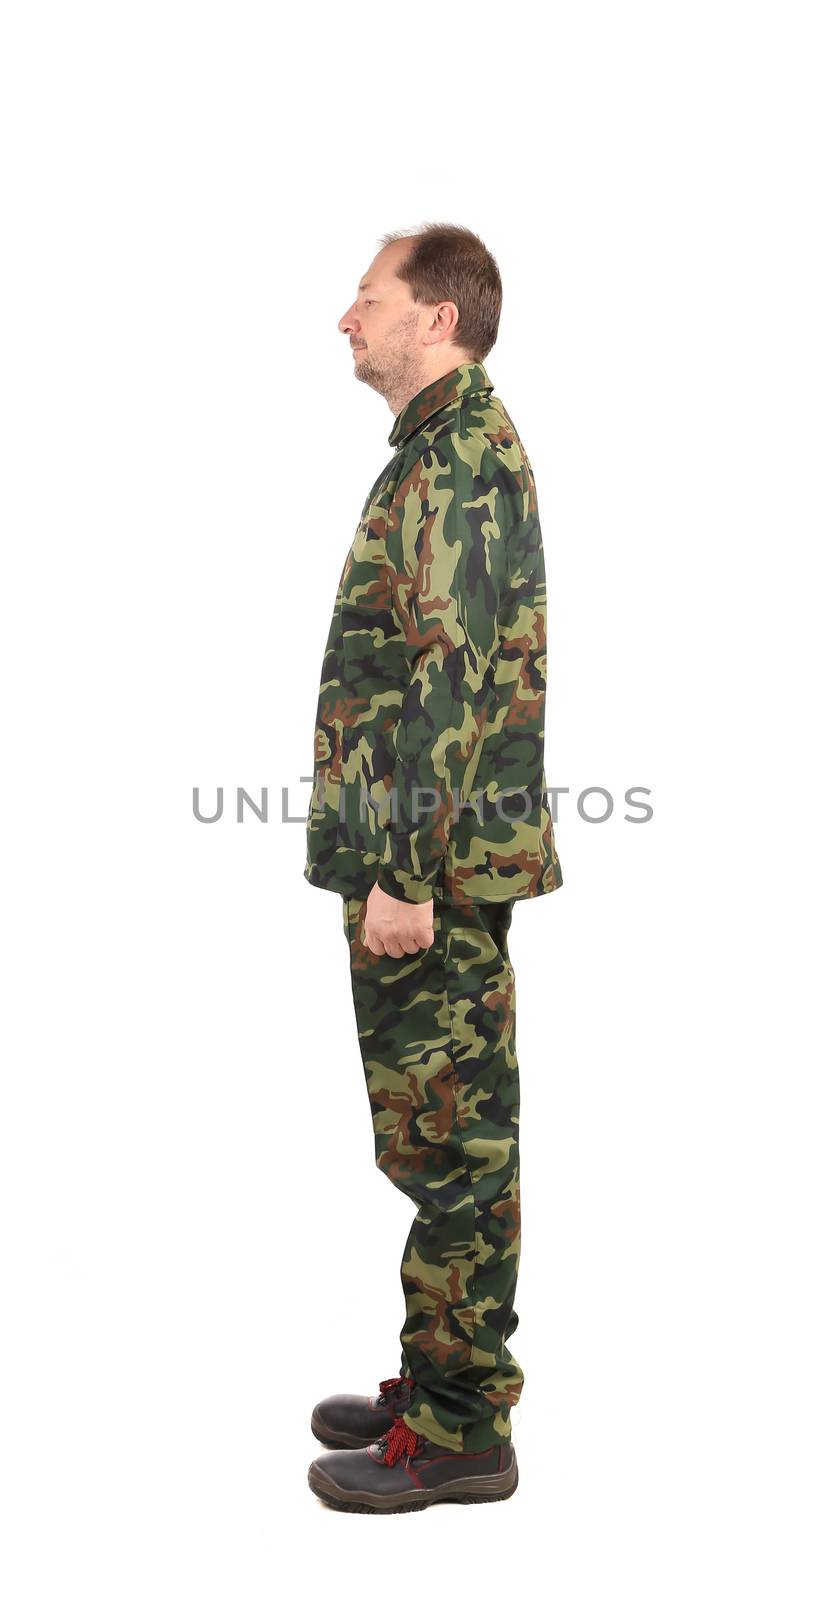 Side view of man in military suit. Isolated on a white background.